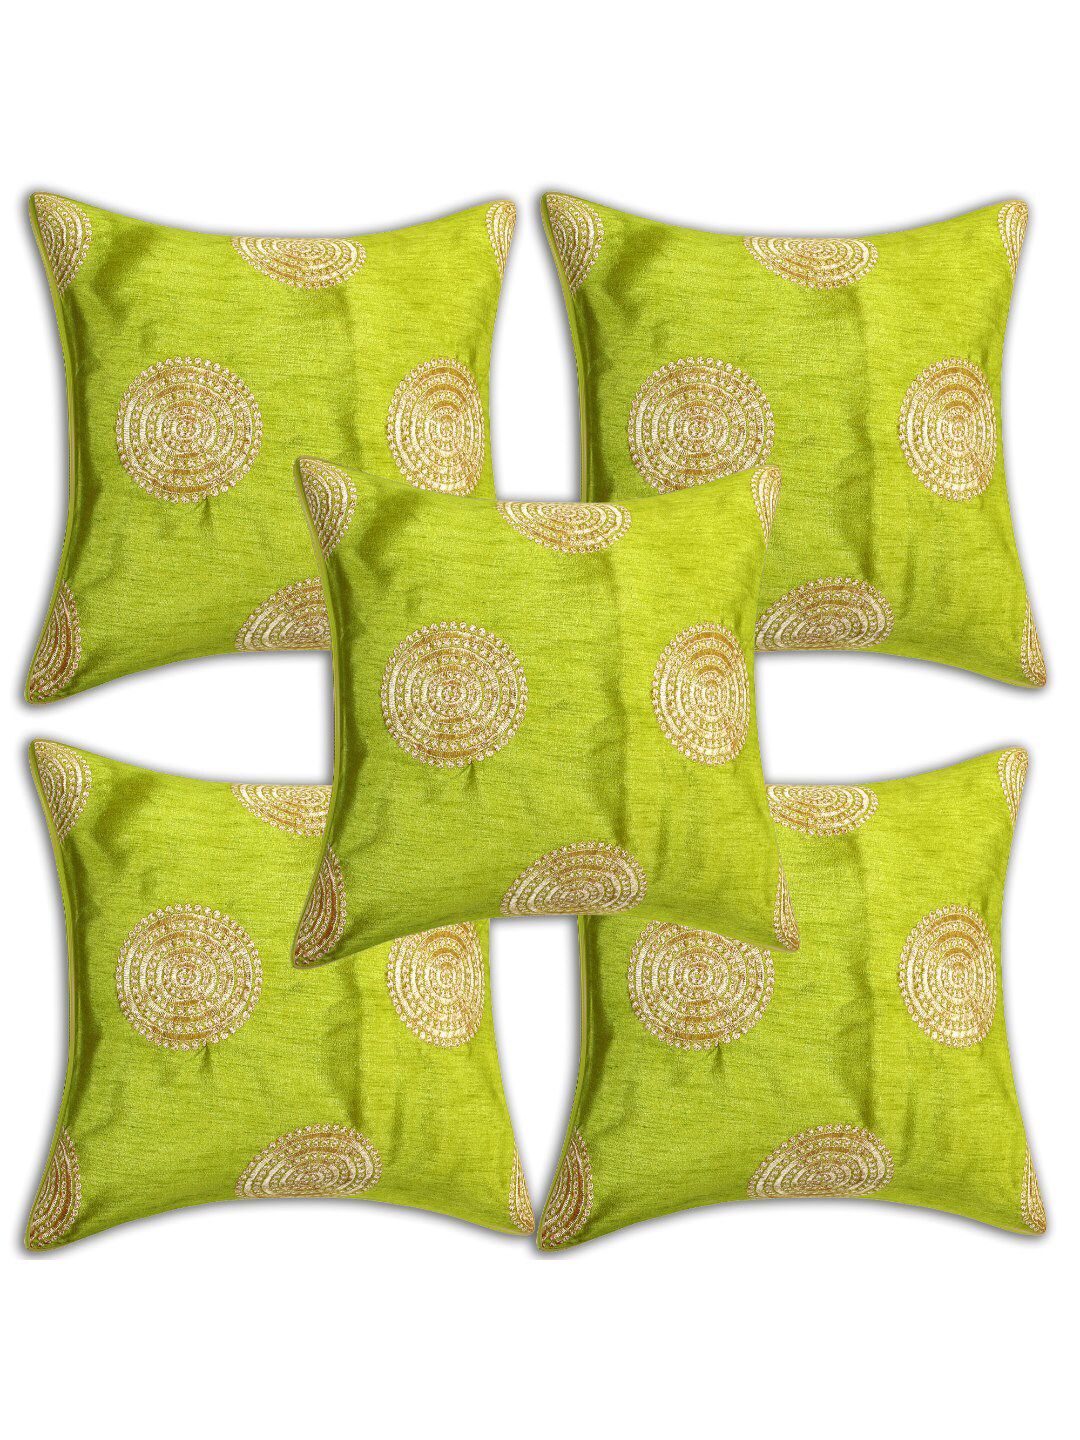 INDHOME LIFE Multicoloured & Gold-Toned Set of 5 Embroidered Square Cushion Covers Price in India